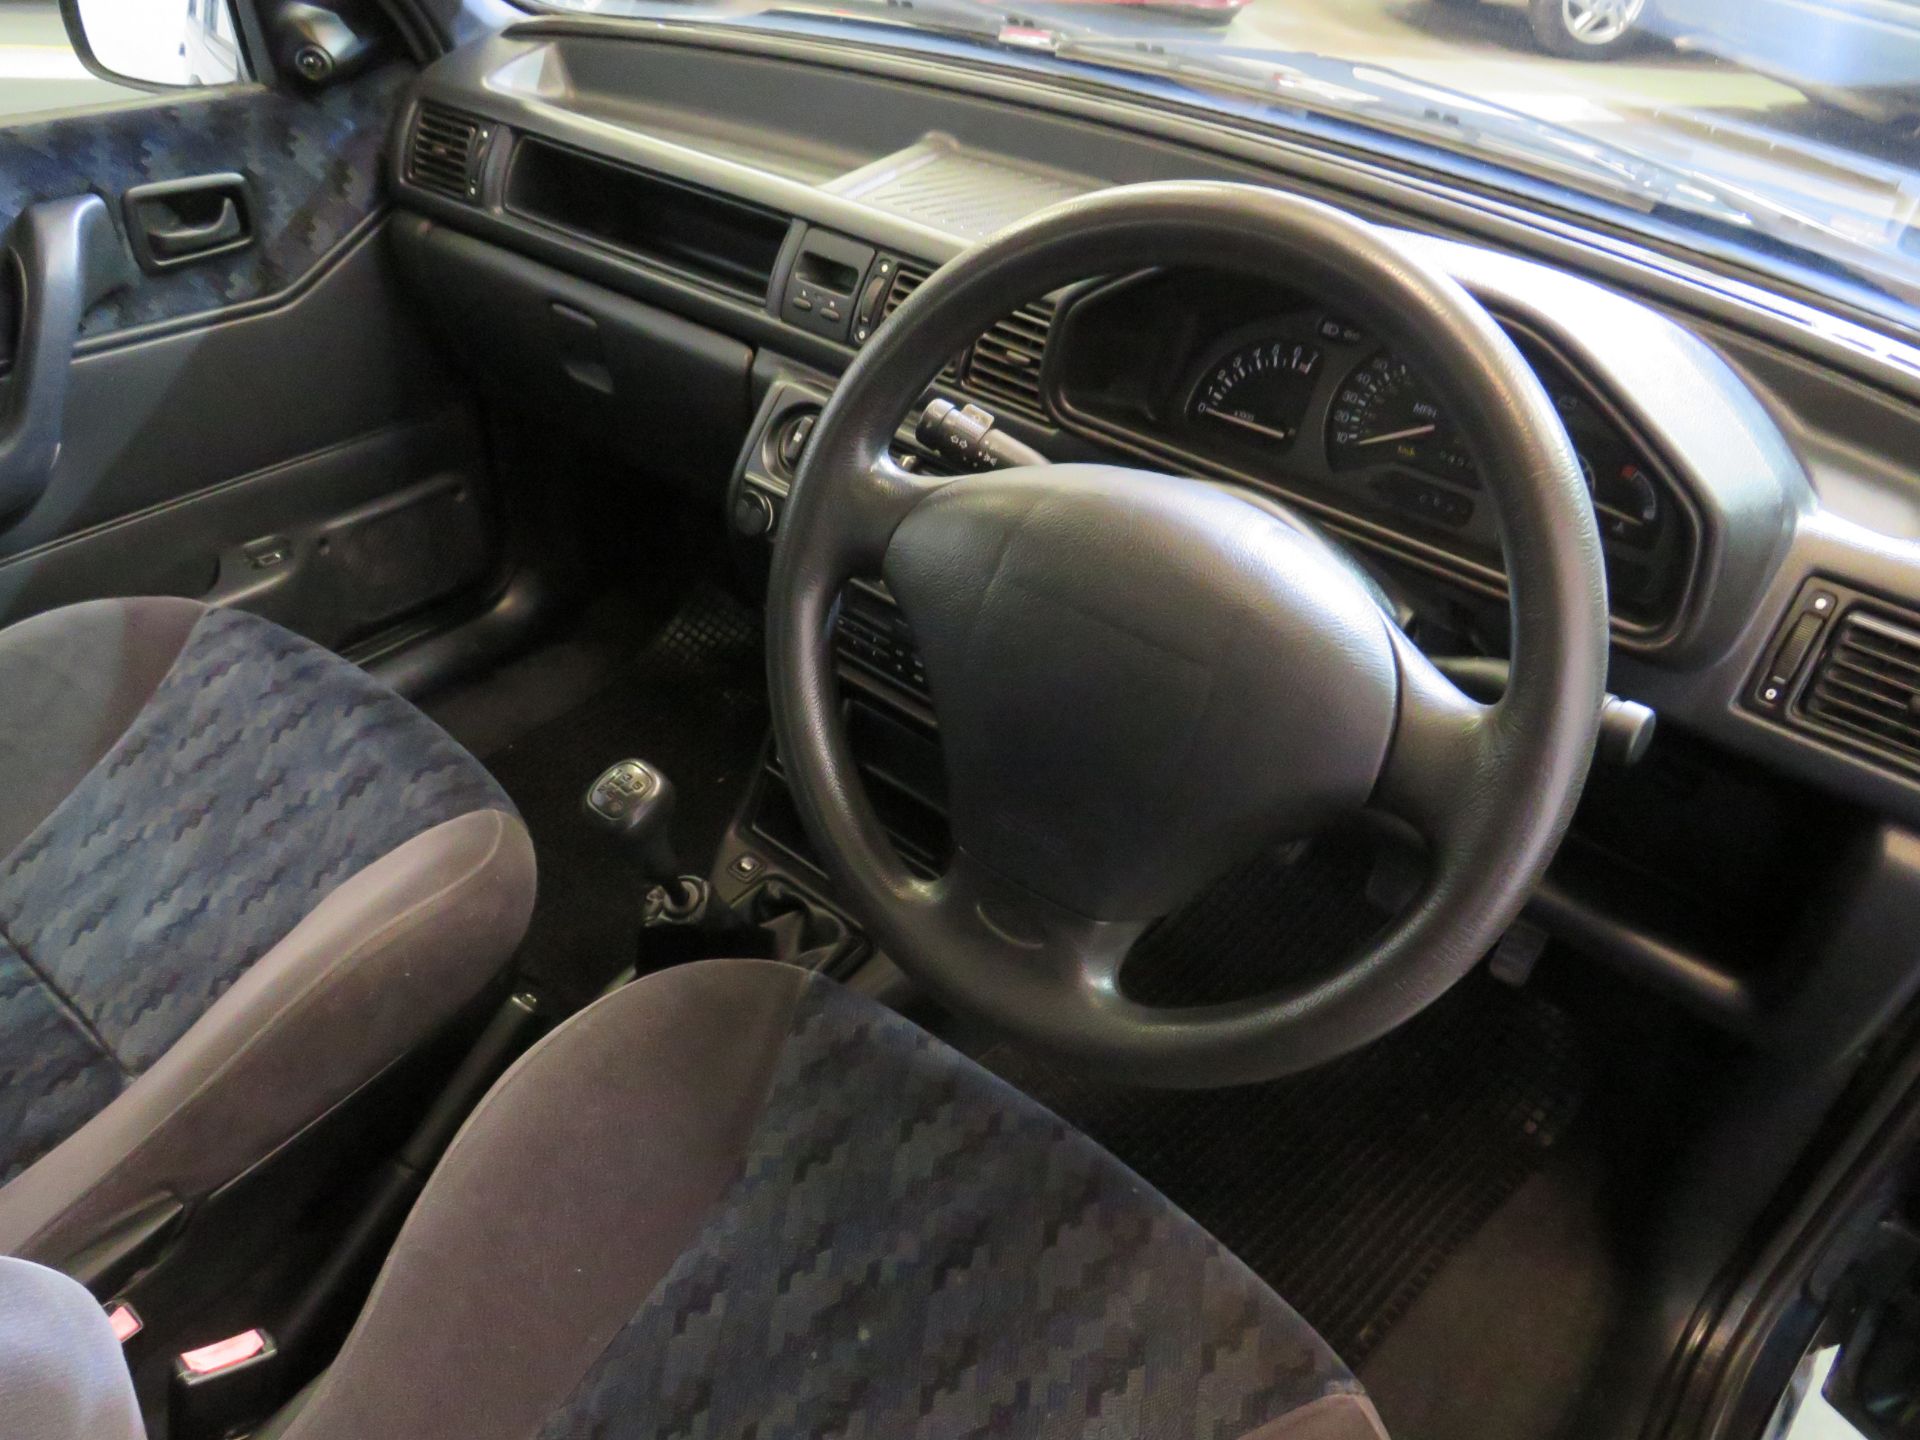 1994 Ford Fiesta SI - 1597cc - Image 9 of 19